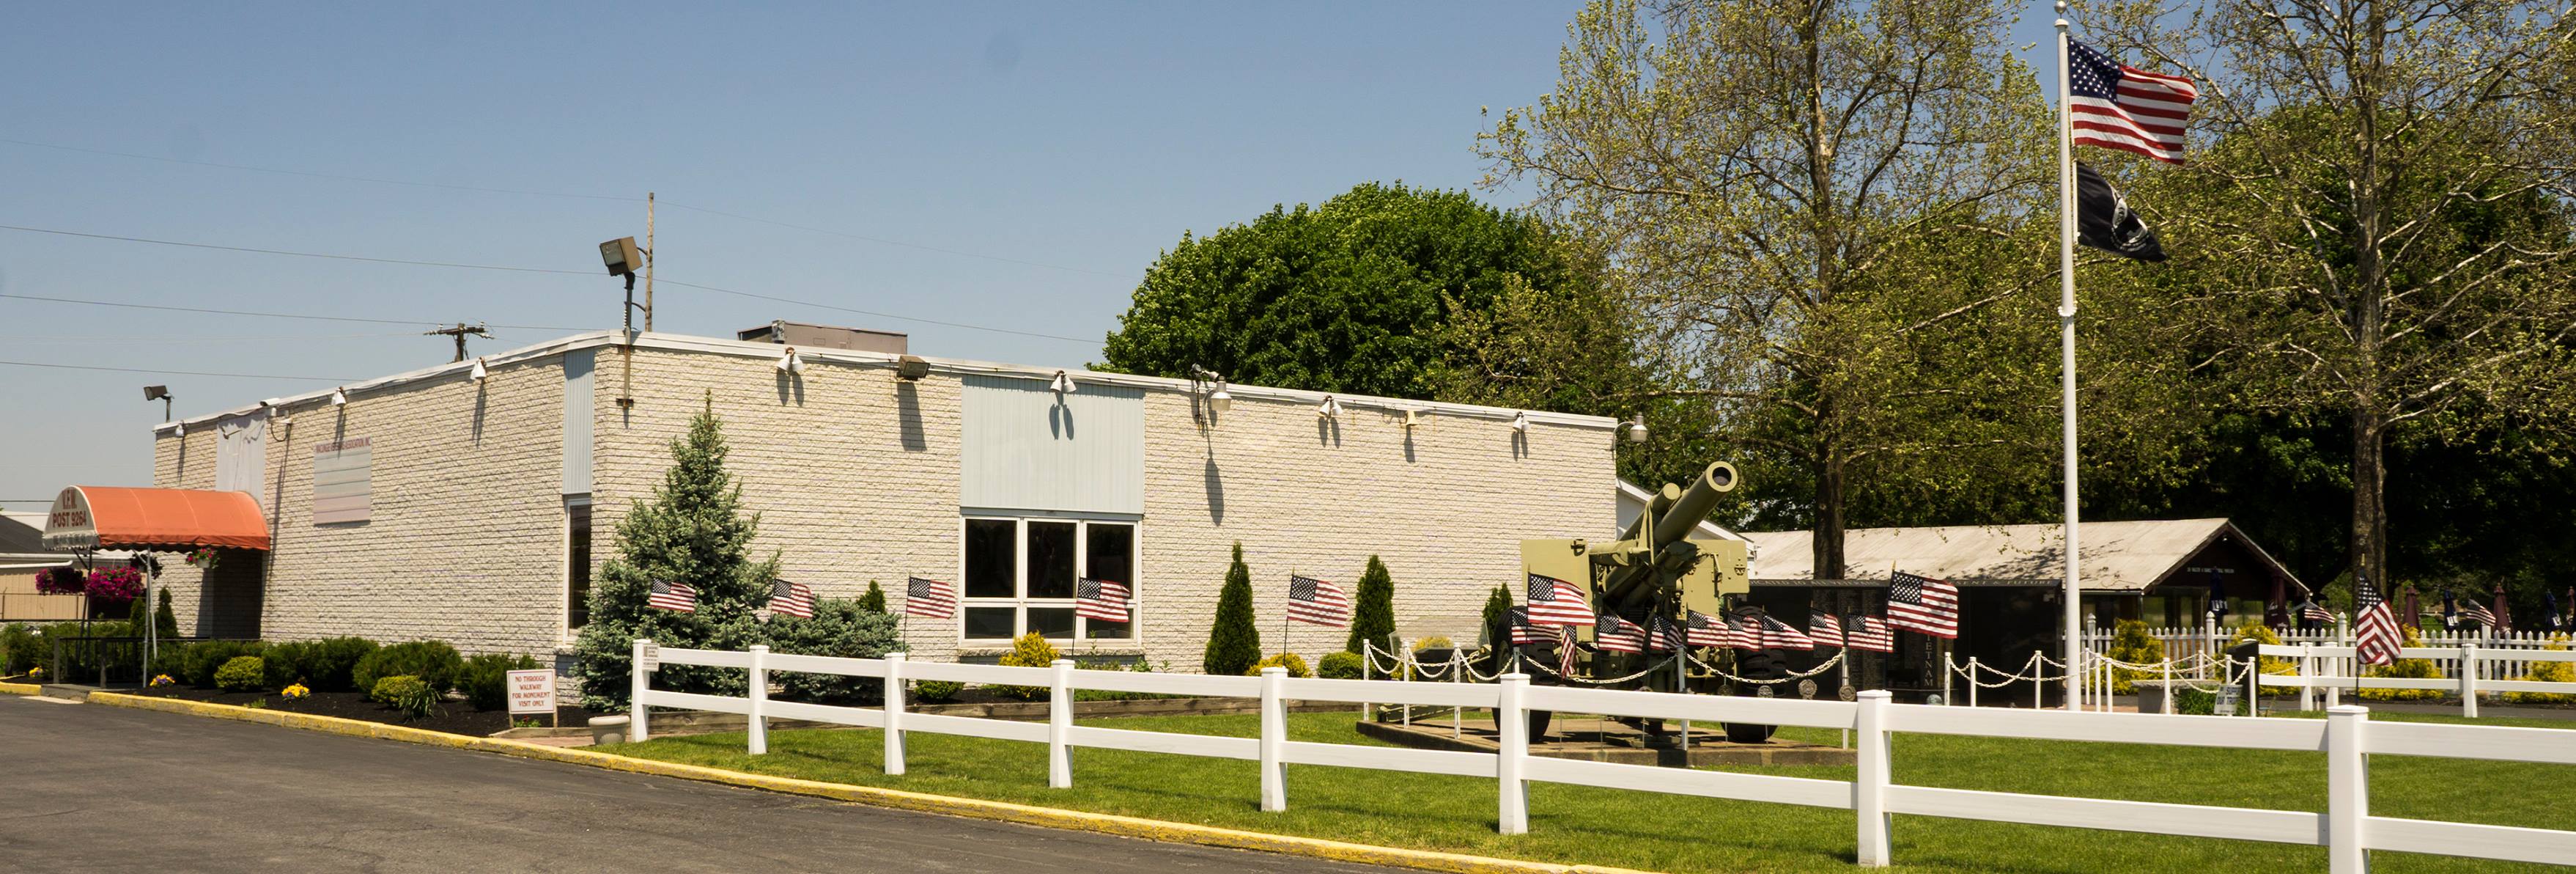 Macungie Vets Dining and Entertainment